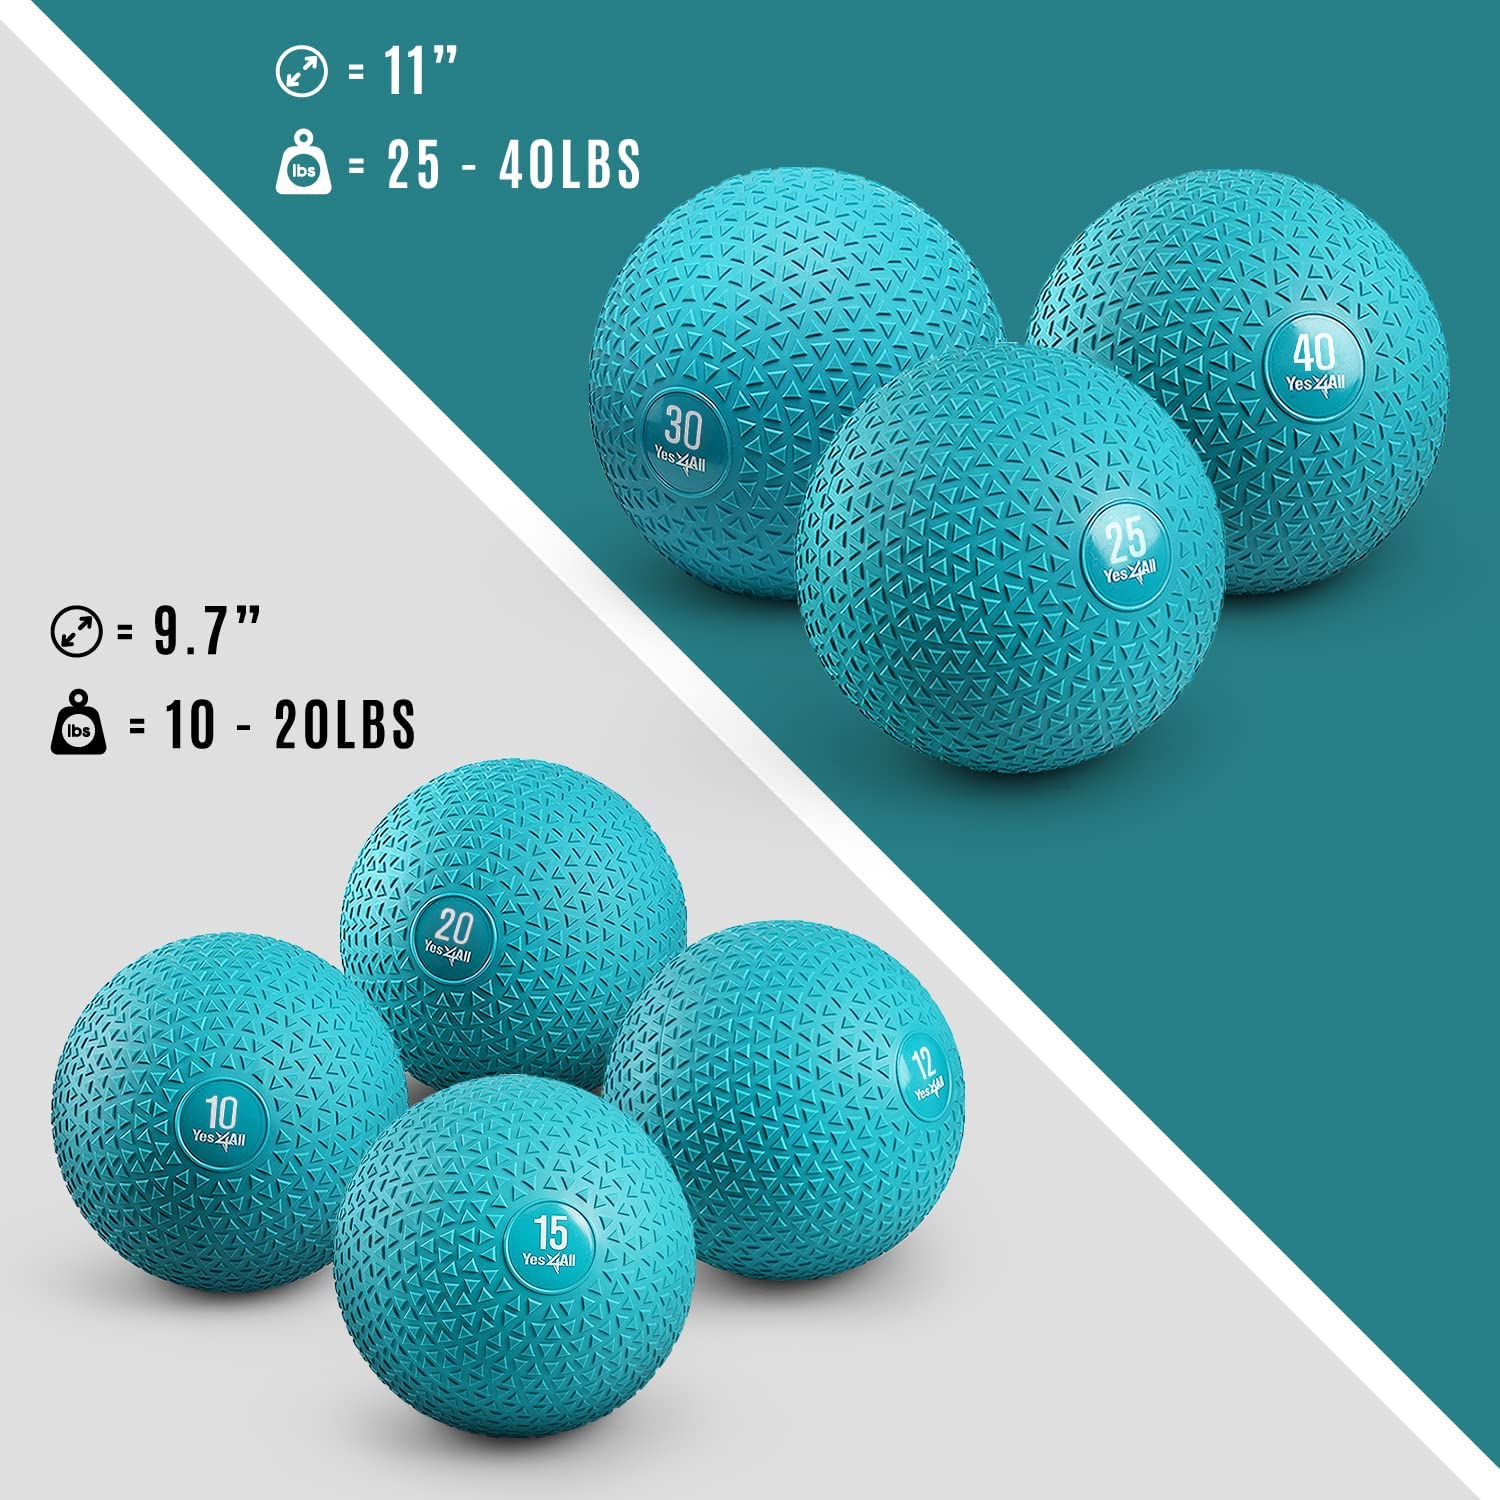 Yes4All 12lbs Slam Medicine Ball Triangle Teal - image 3 of 8